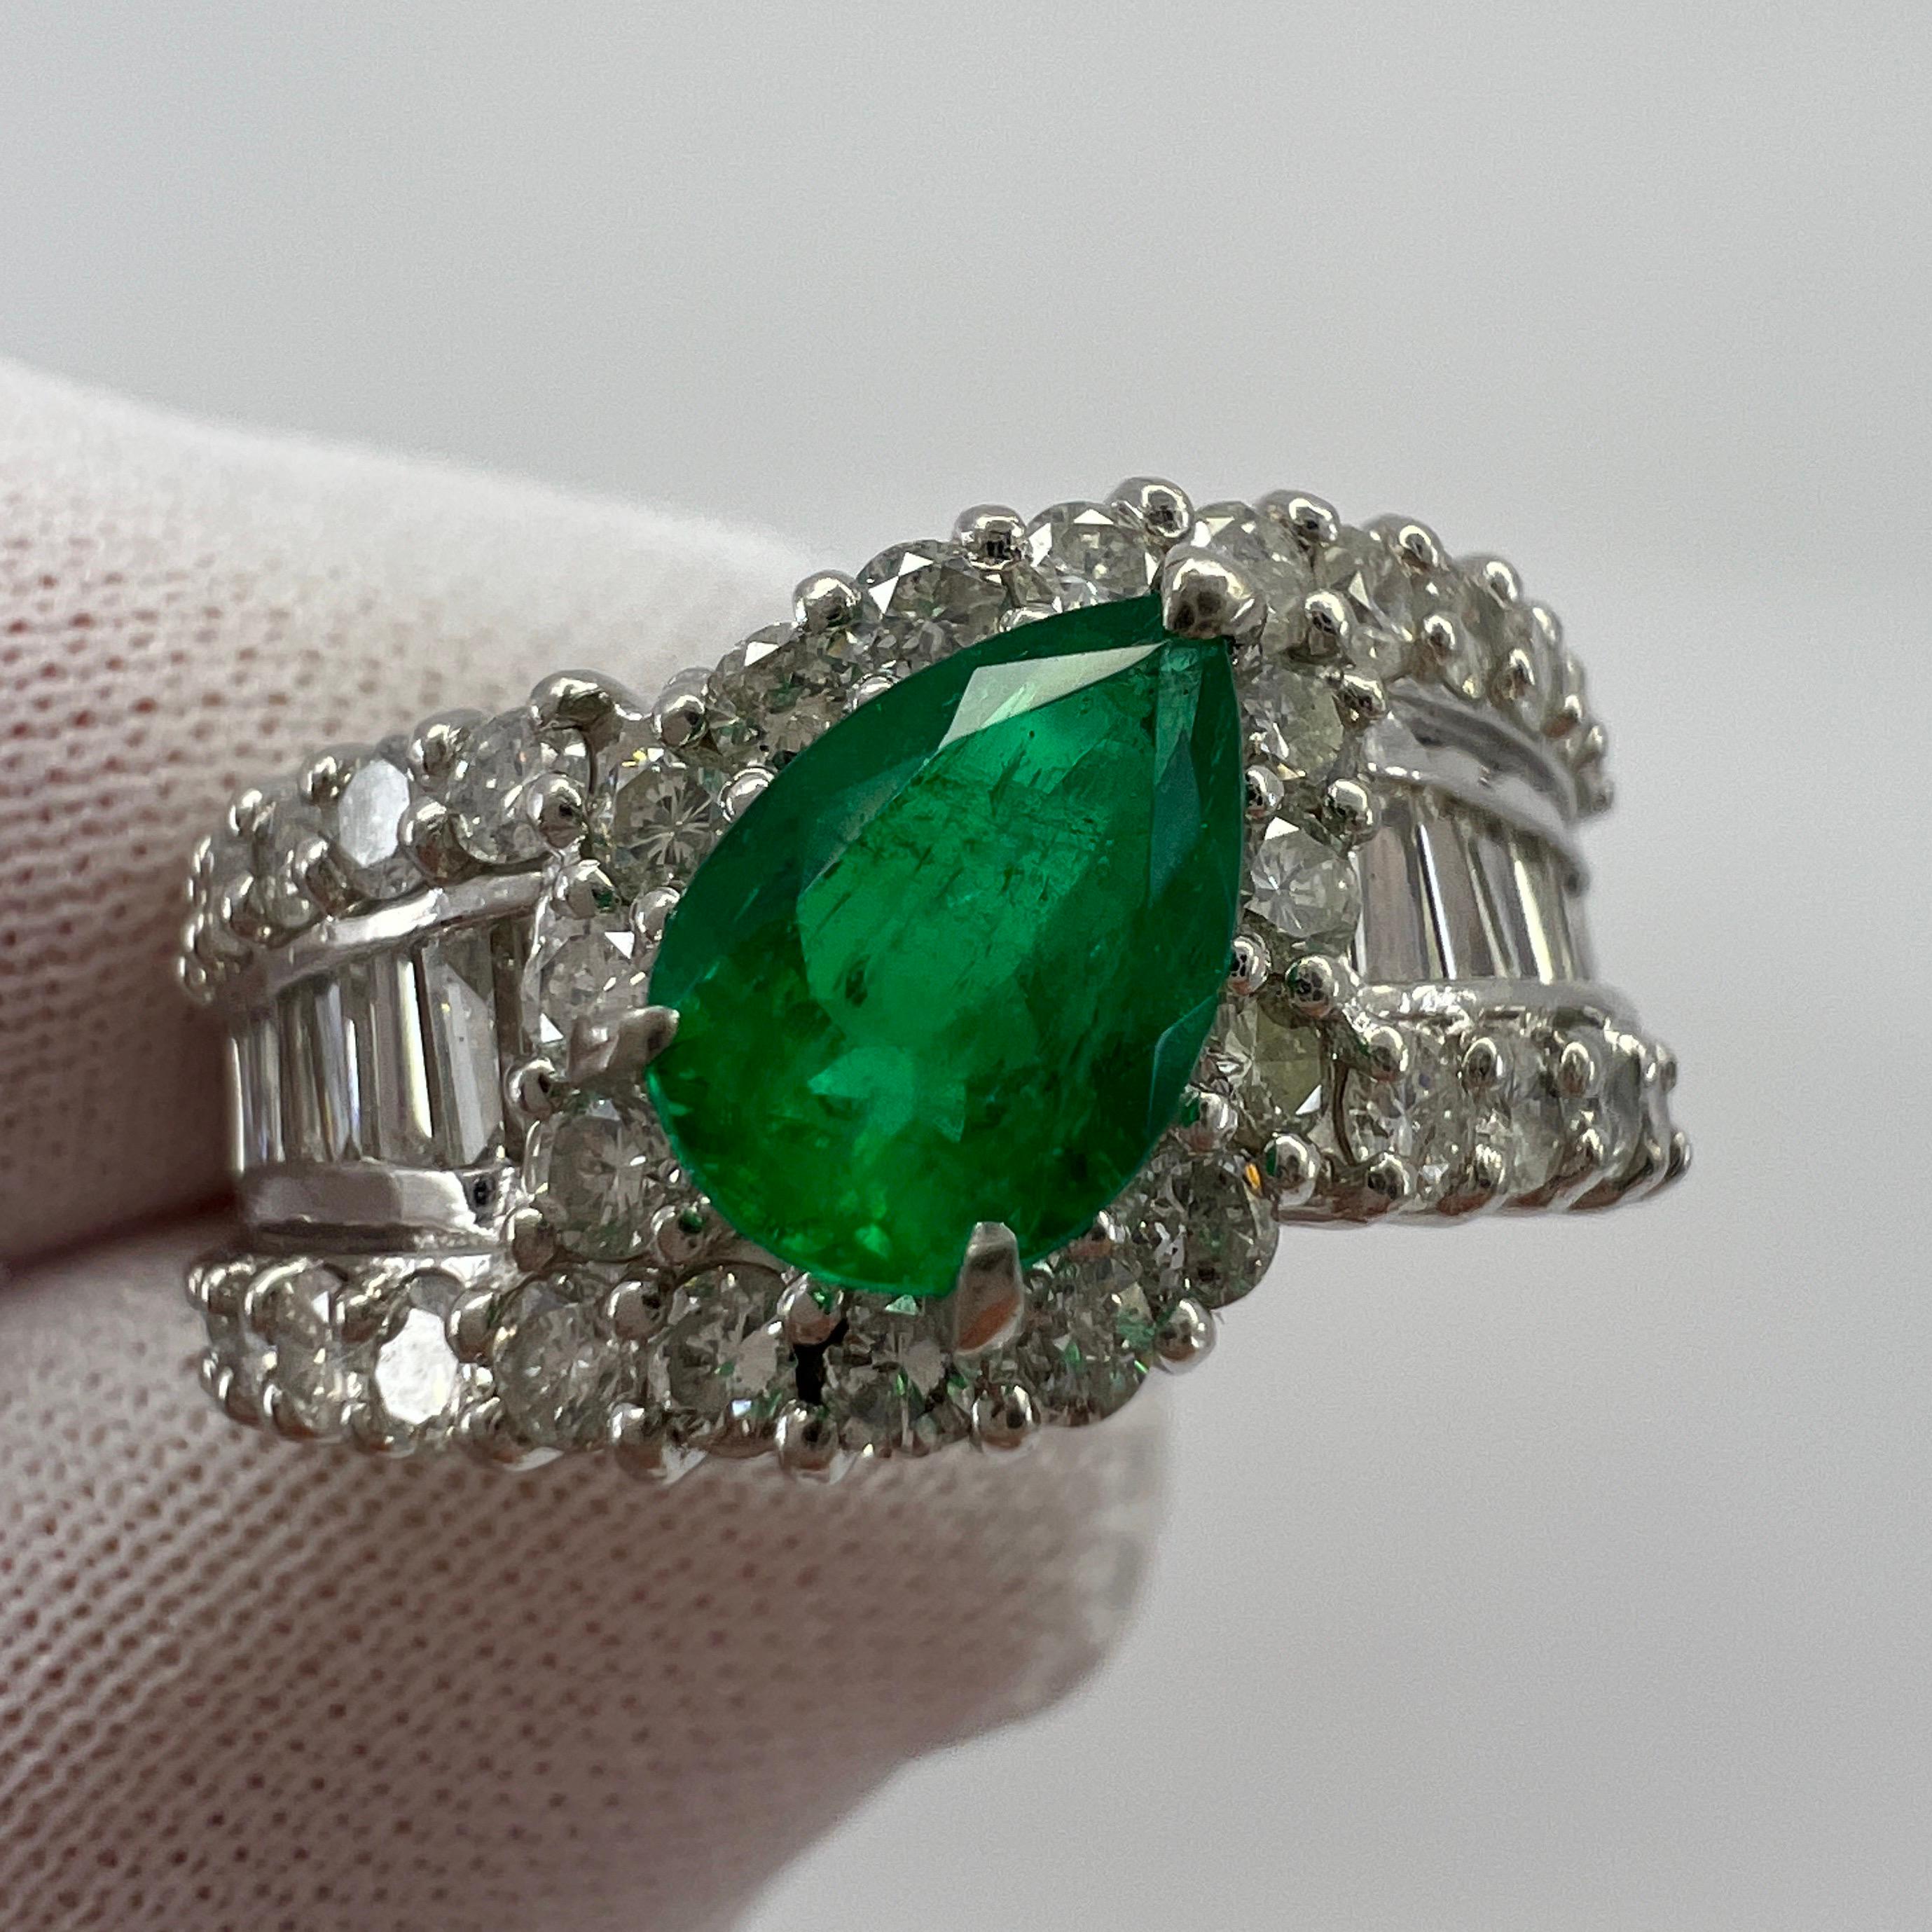 Fine Vivid Green Colombian Emerald & Diamond Platinum Cluster Ring.

Stunning 1.32 carat Colombian emerald with a fine vivid green colour and an excellent pear cut. The emerald has good clarity with only some small natural inclusions visible when